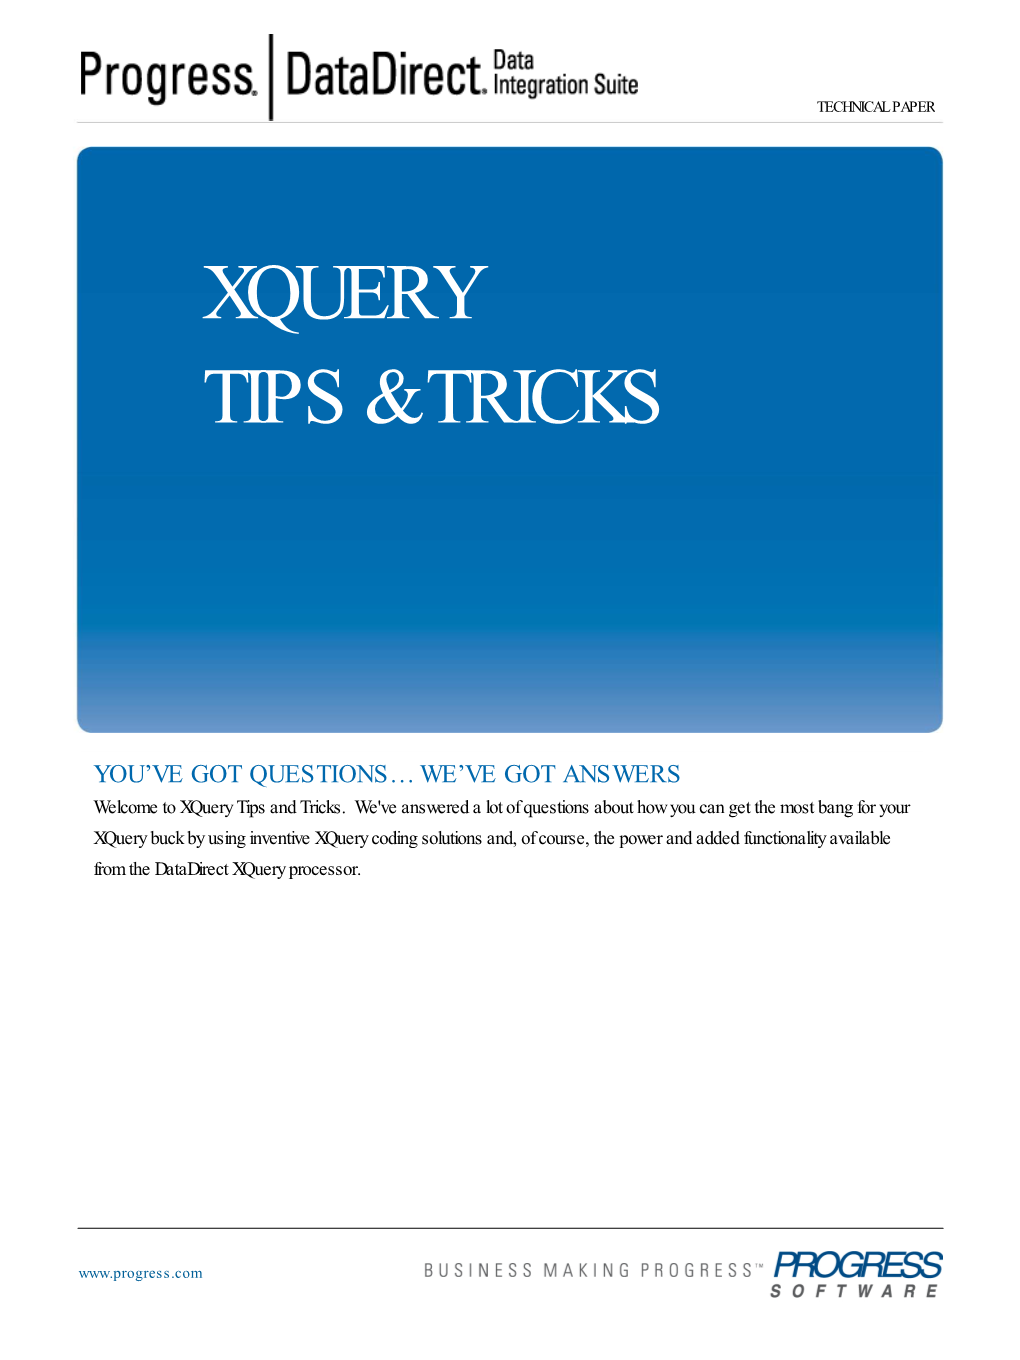 Xquery Tips & Tricks